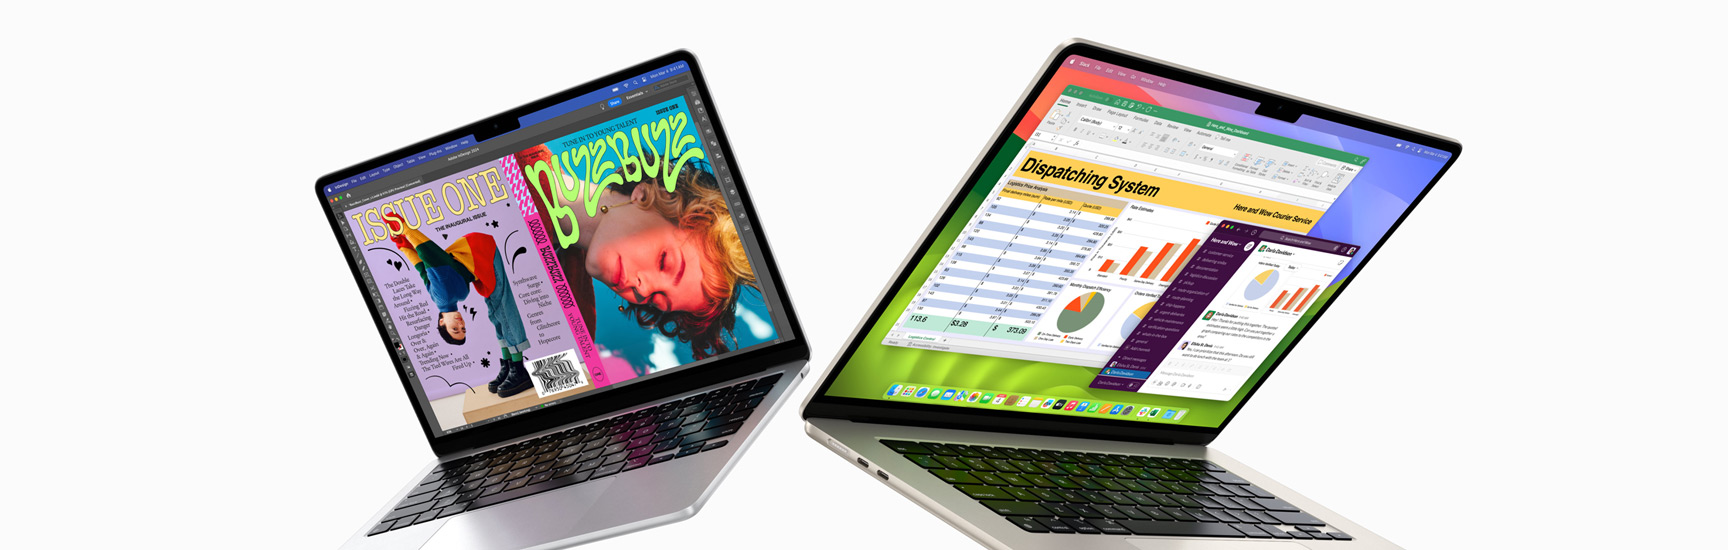 Partially open 13-inch MacBook Air on left and 15-inch MacBook Air on right. 13-inch screen shows colourful magazine cover created with In Design. 15-inch screen shows Microsoft Excel and Slack.